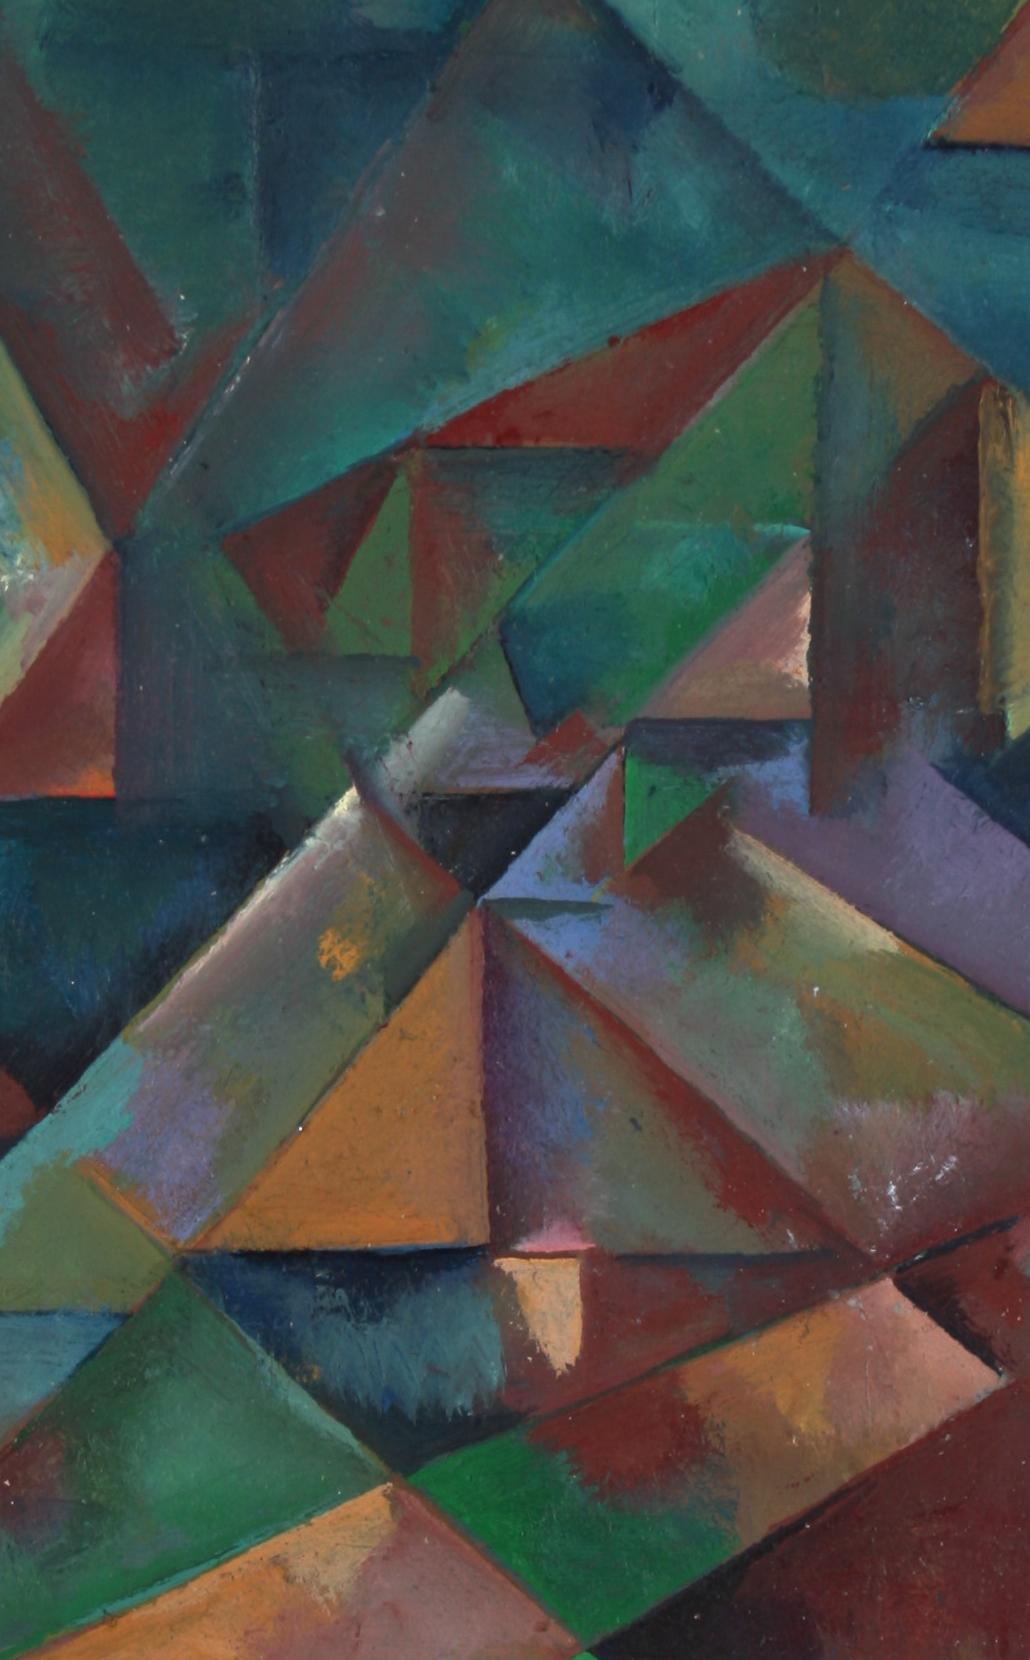 Schuyler Standish Abstract Painting - Desaturated Triangular Grid Late 20th Century Oil on Paper